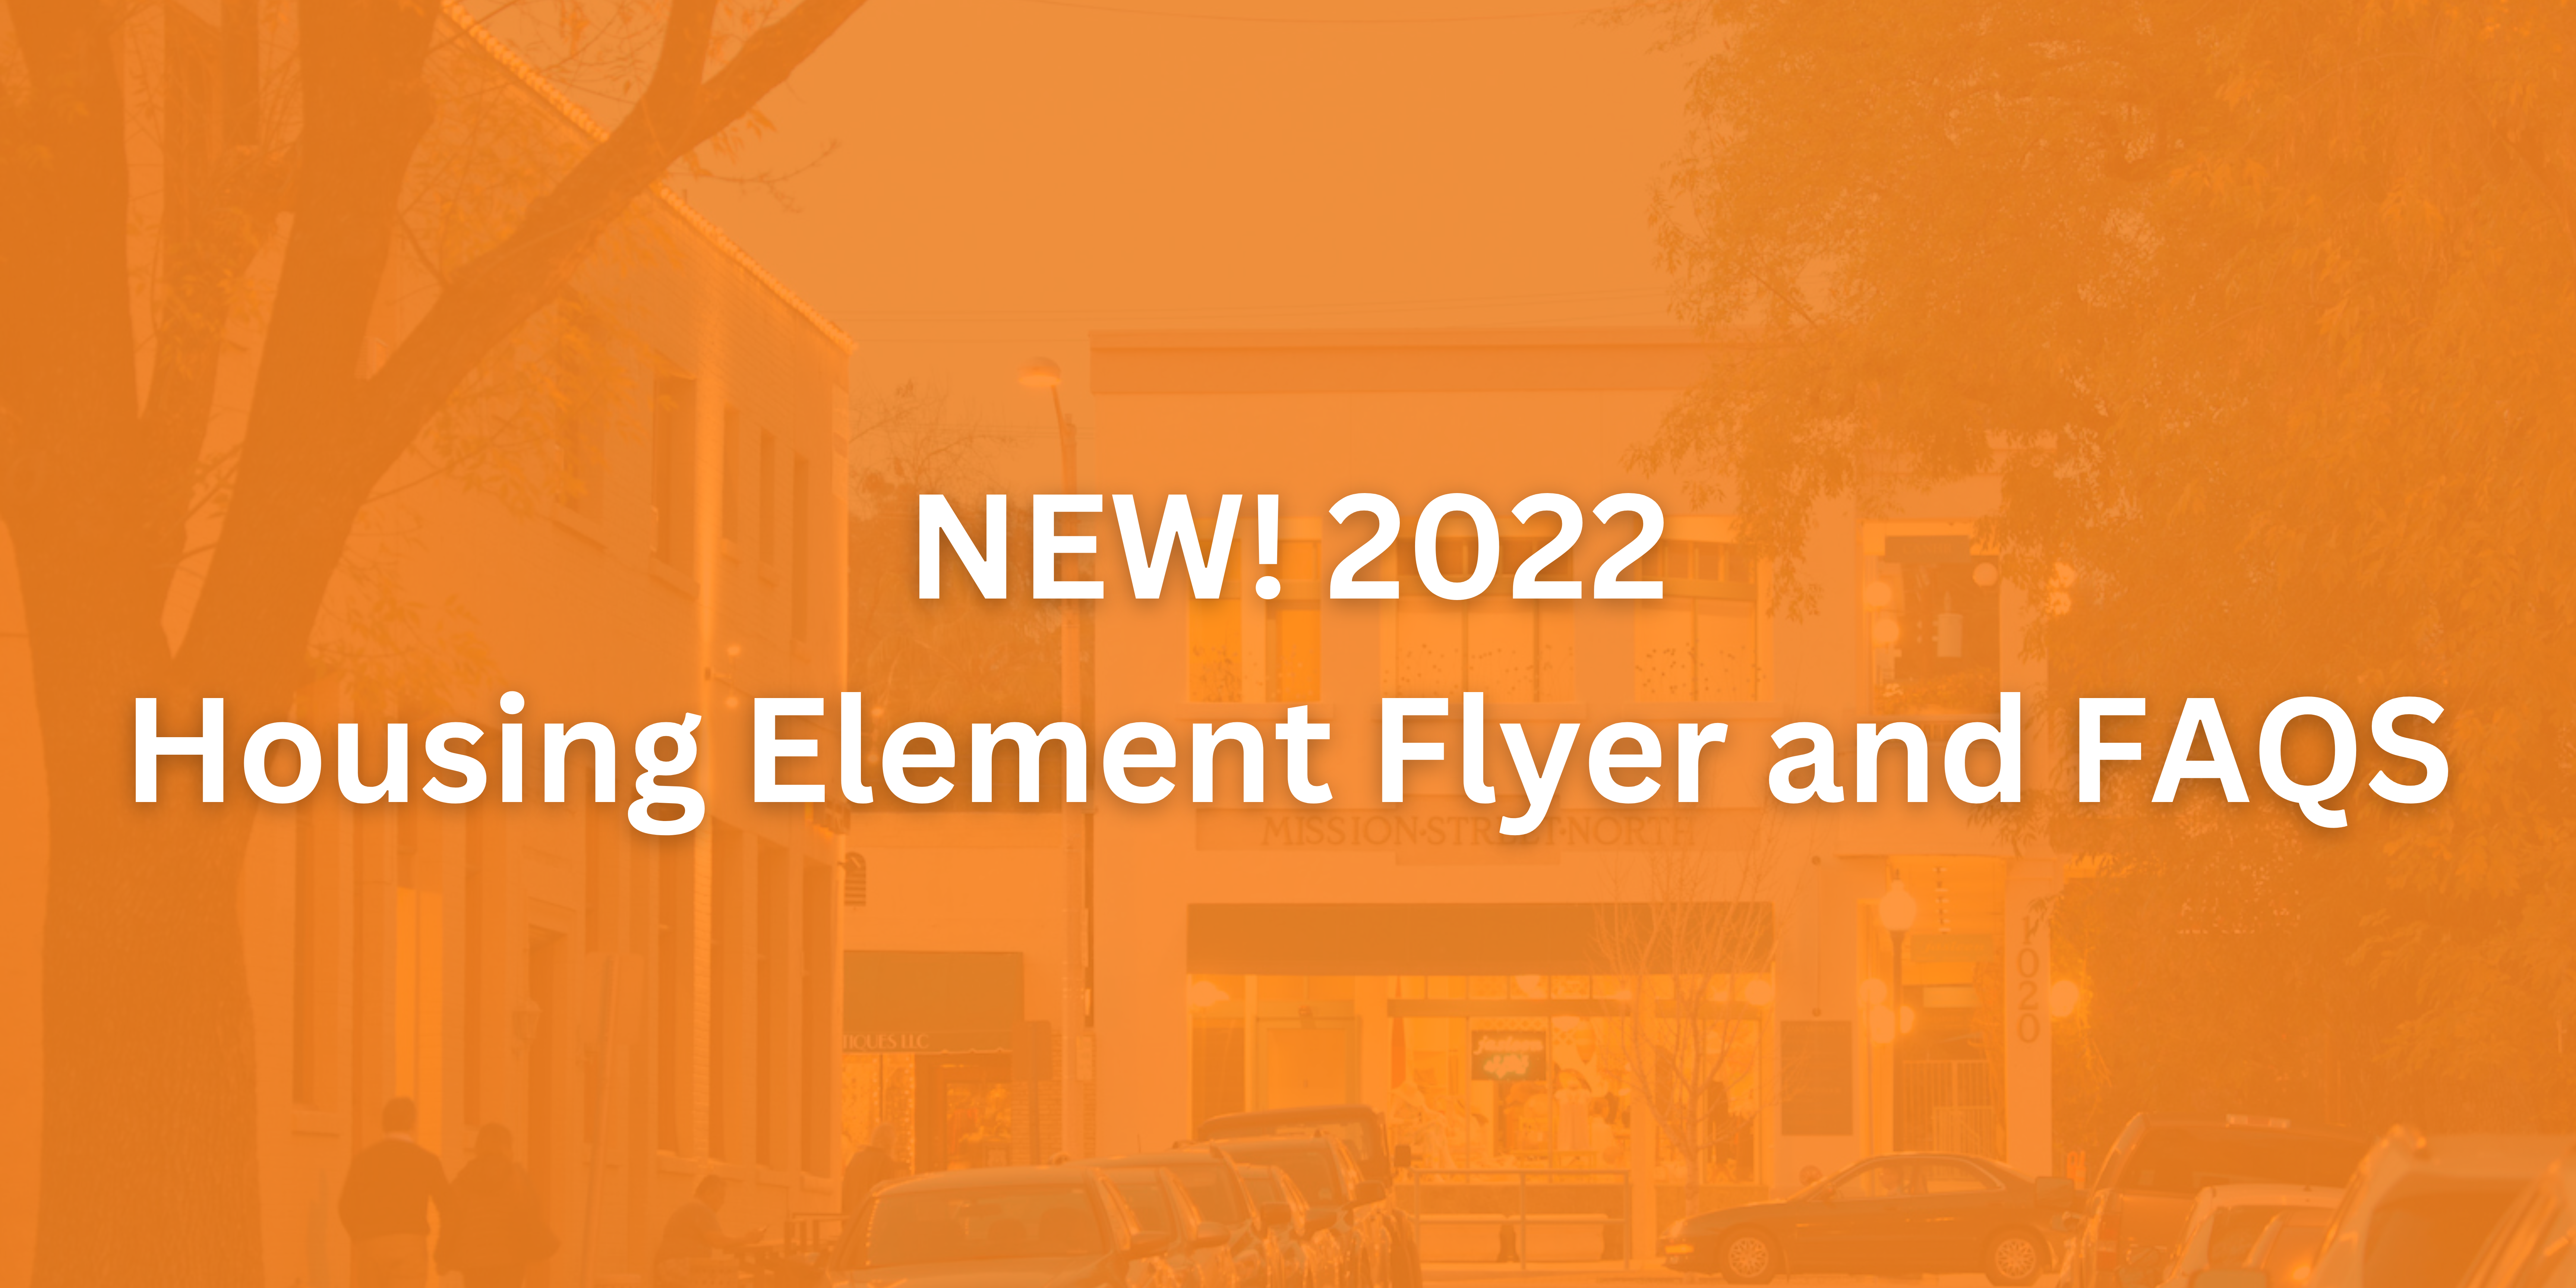 NEW! 2022 Housing Element FLyer and FAQS.png